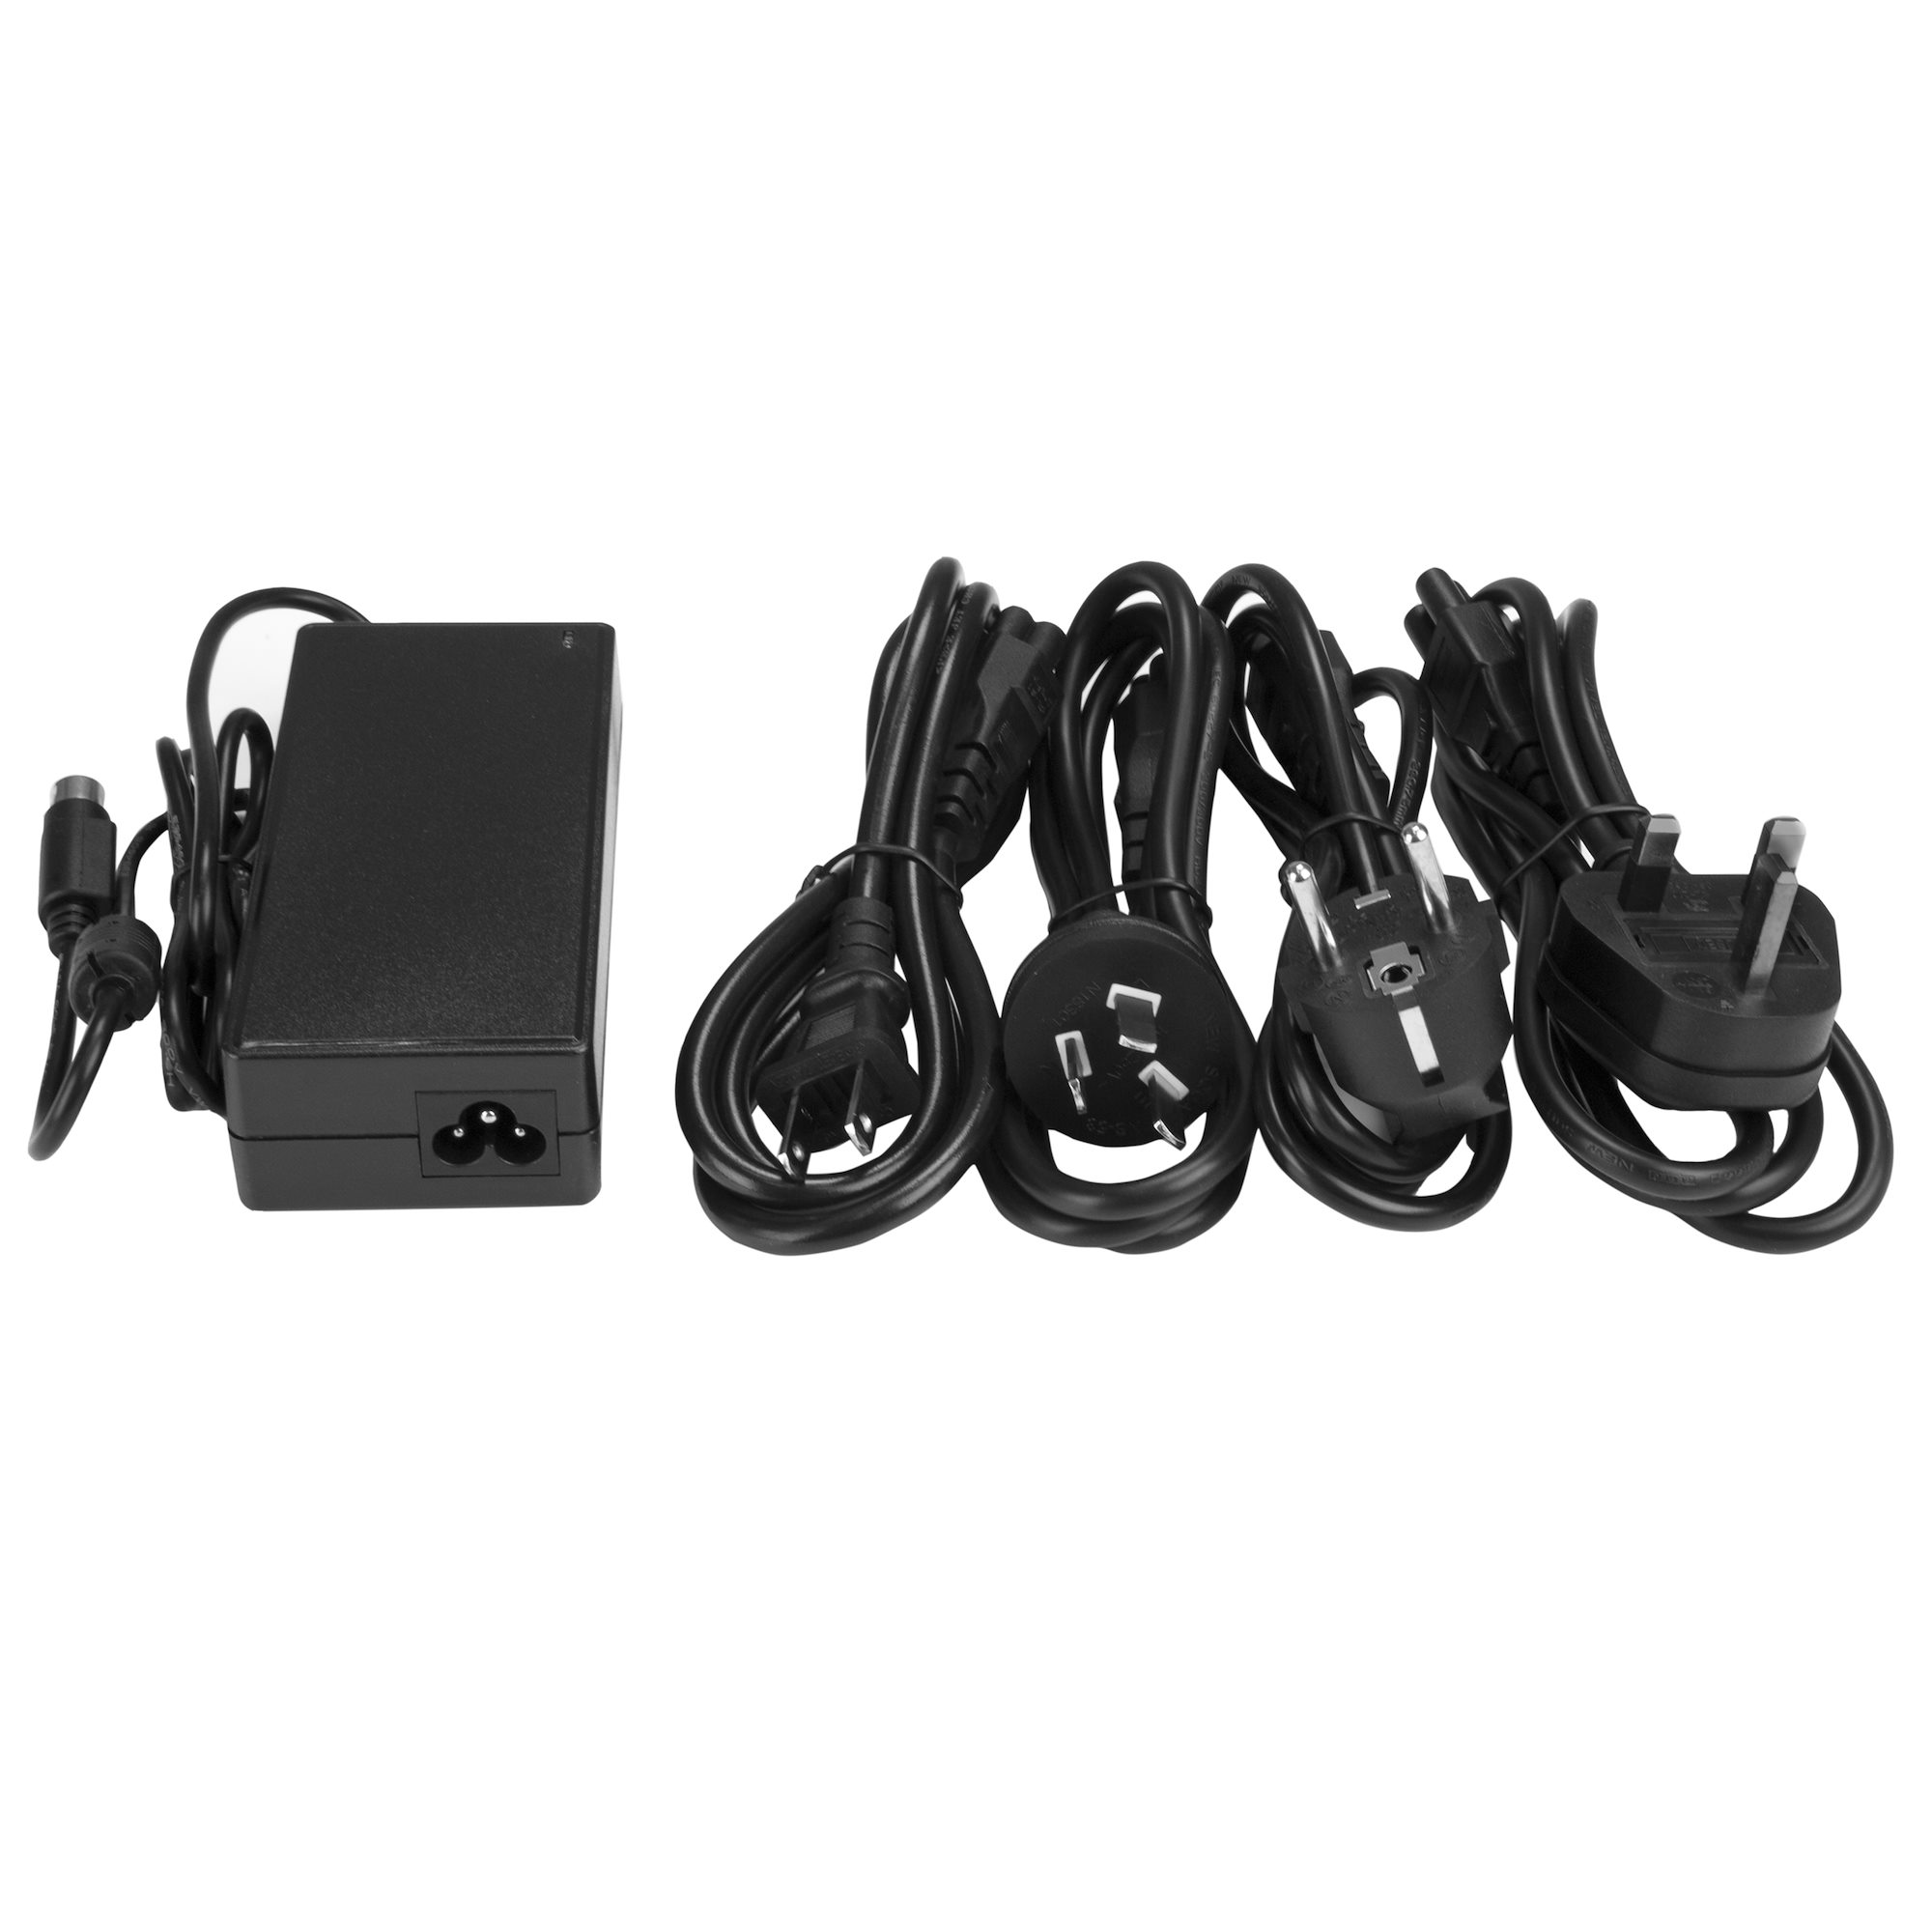 Power Adapter DC 12V 6.5A - Replacement - Power Adapters, Computer Parts